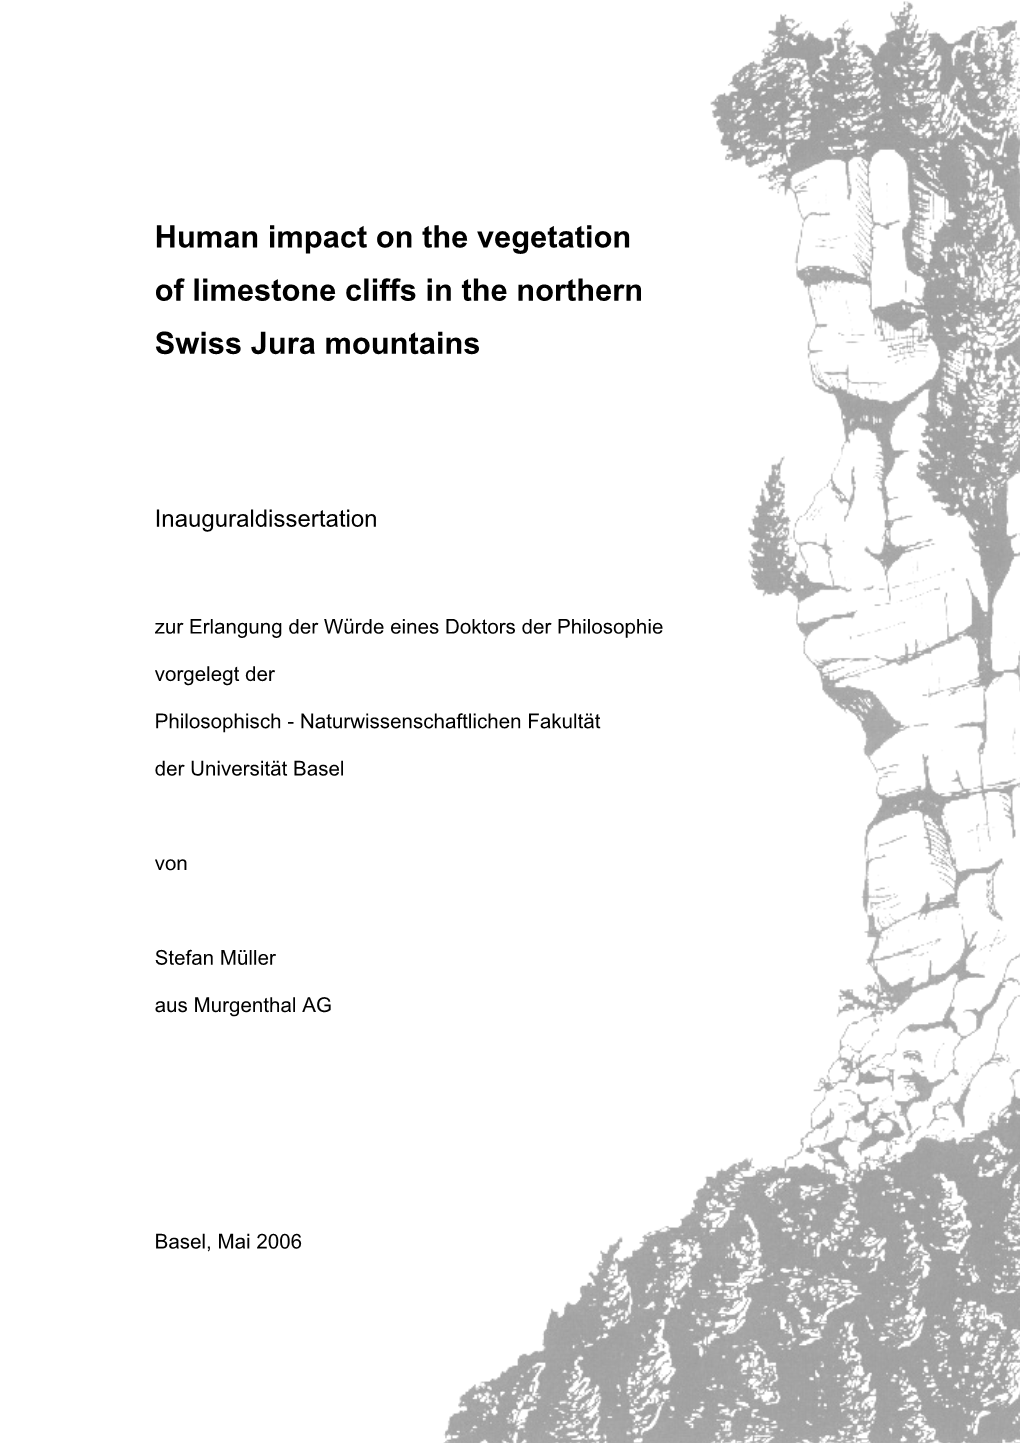 Human Impact on the Vegetation of Limestone Cliffs in the Northern Swiss Jura Mountains